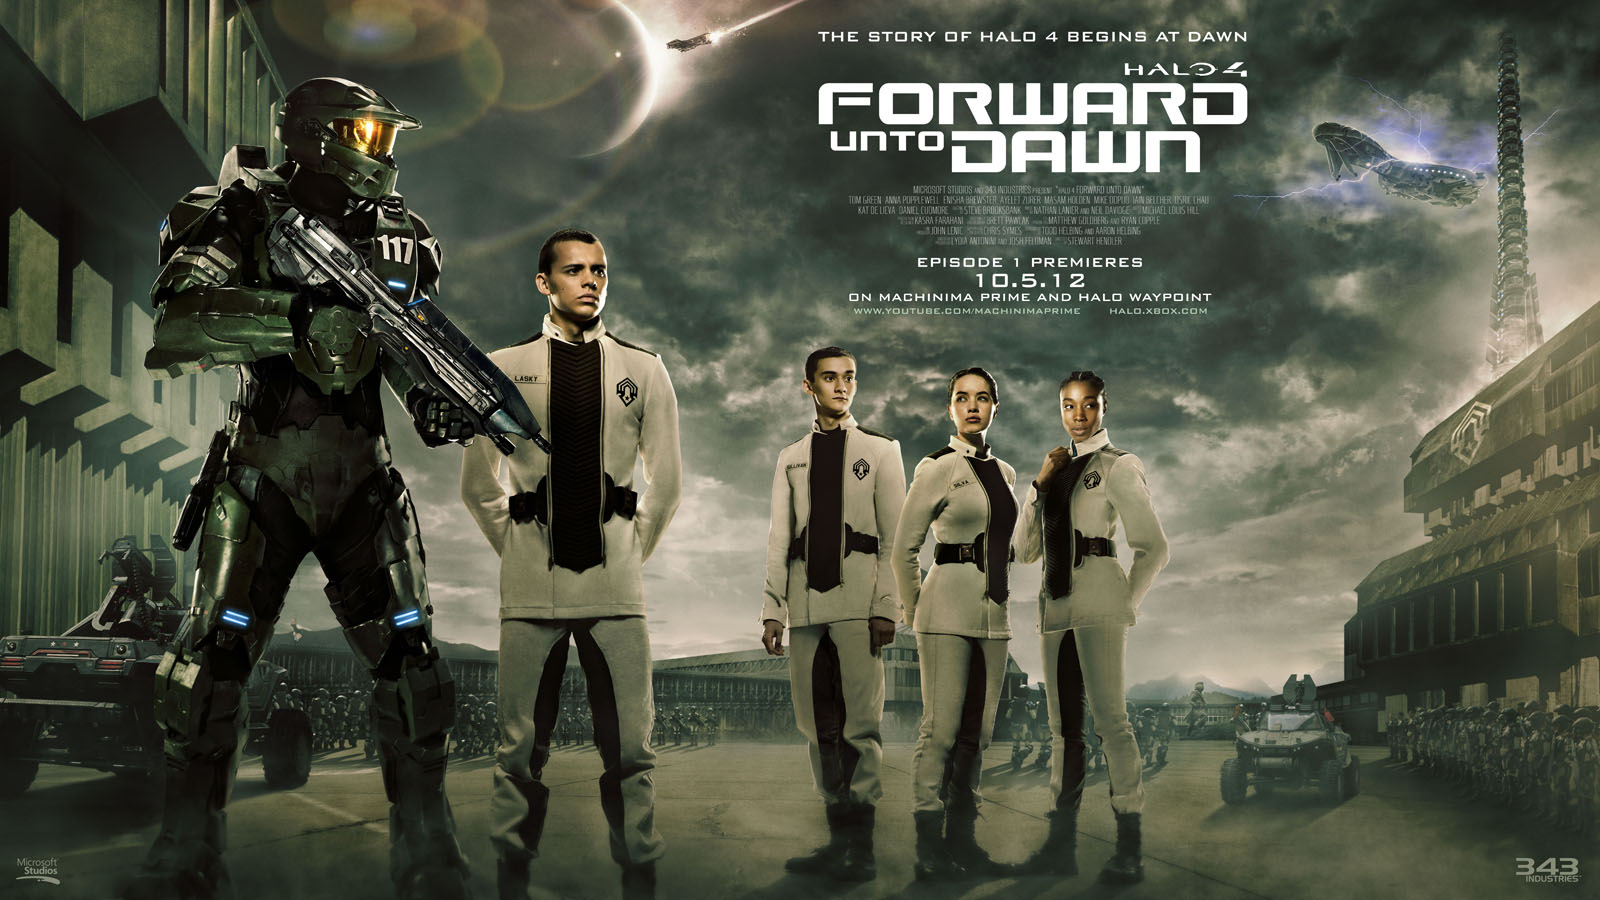 http://psotter.com/wp-content/uploads/2012/10/Halo-4-Forward-Unto-Dawn.jpg